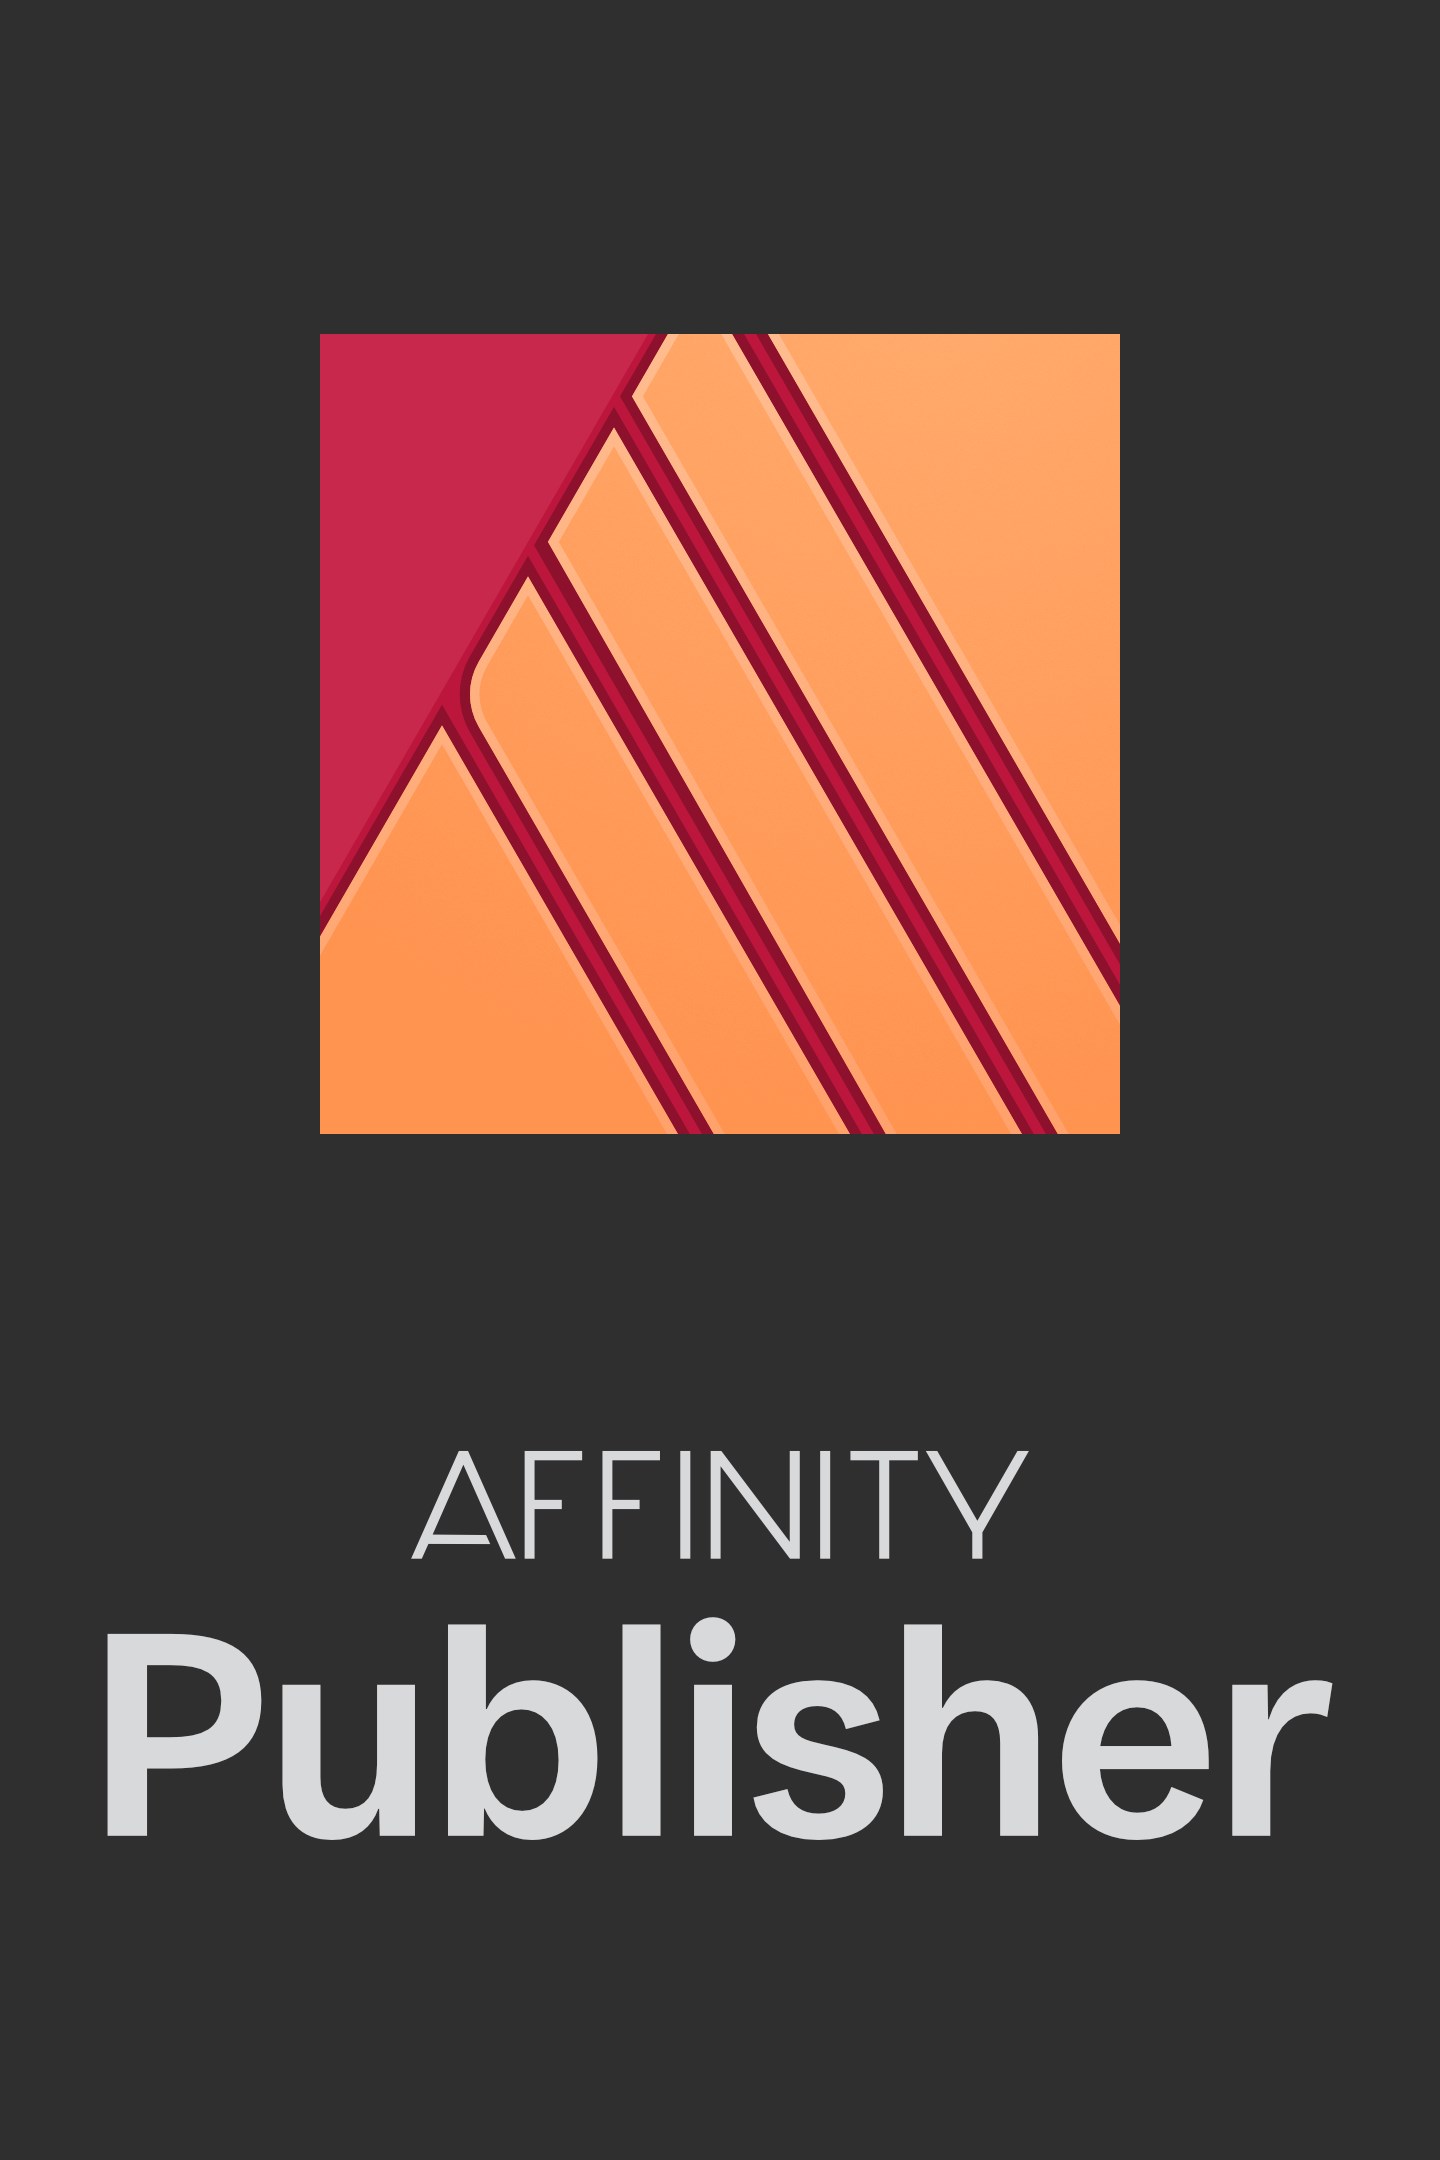 Is affinity publisher any good